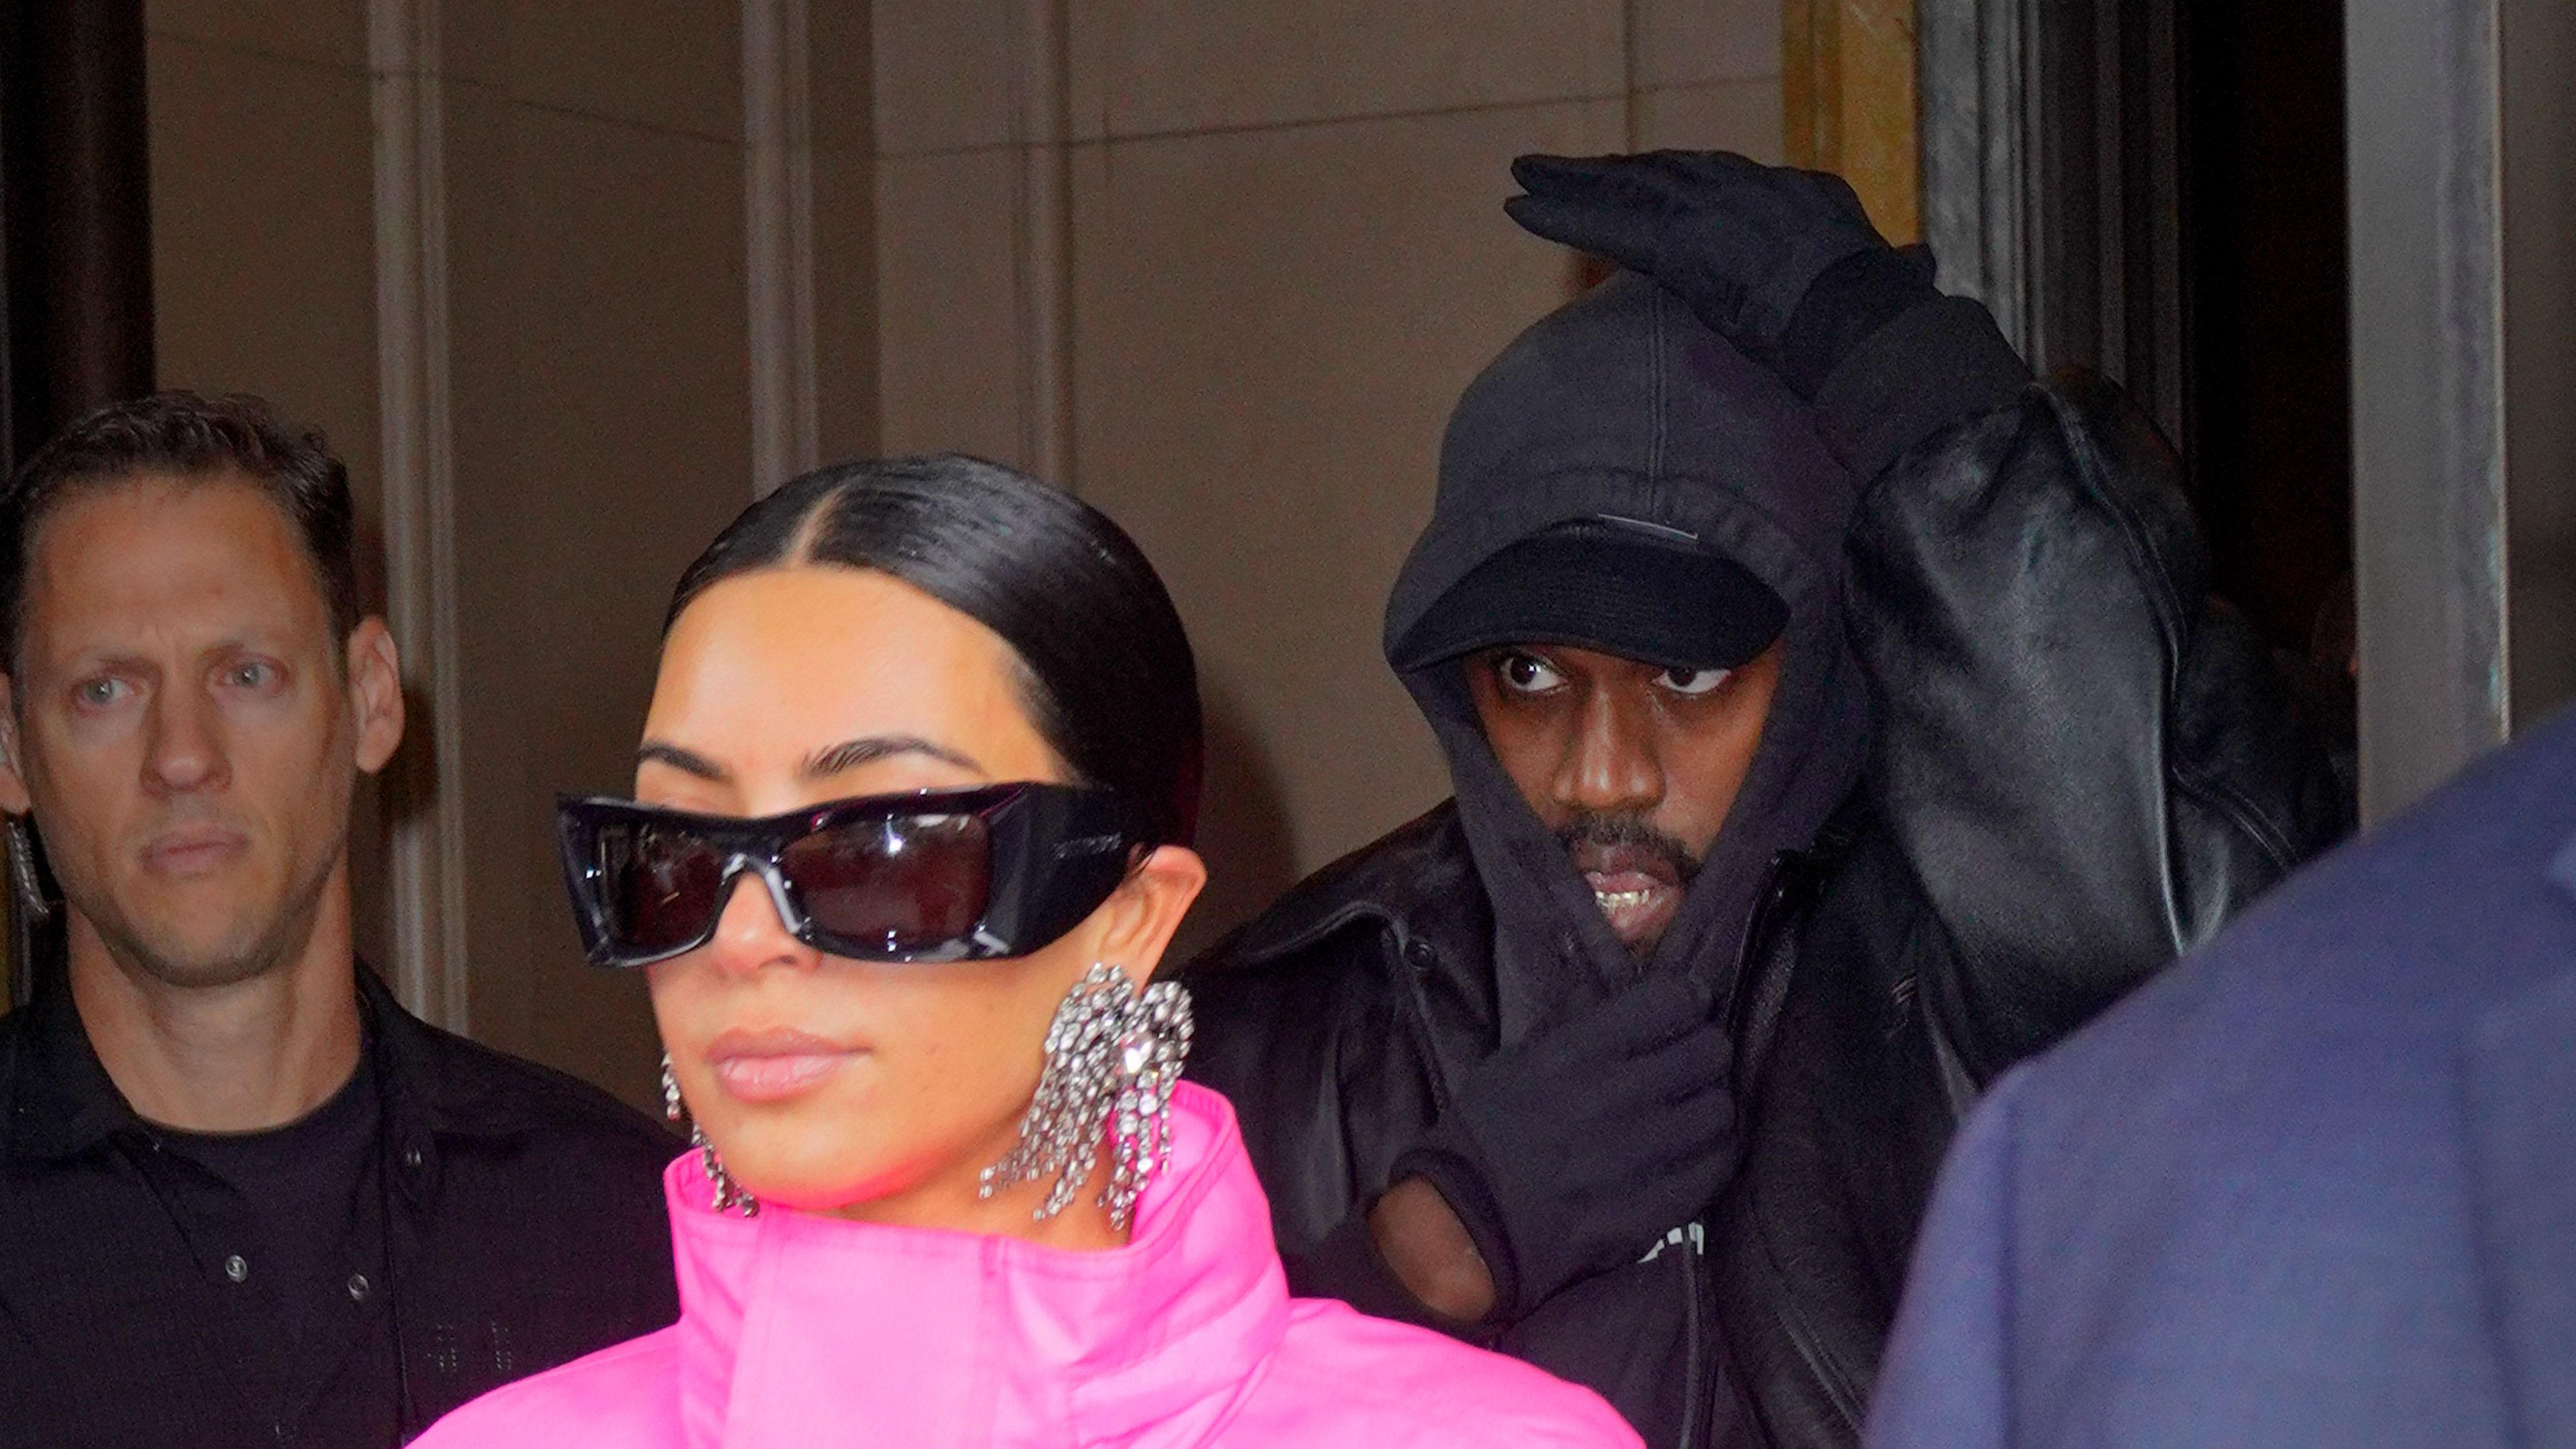 Kanye West Doesn't Want to Be Seen, But His Jacket Says Otherwise